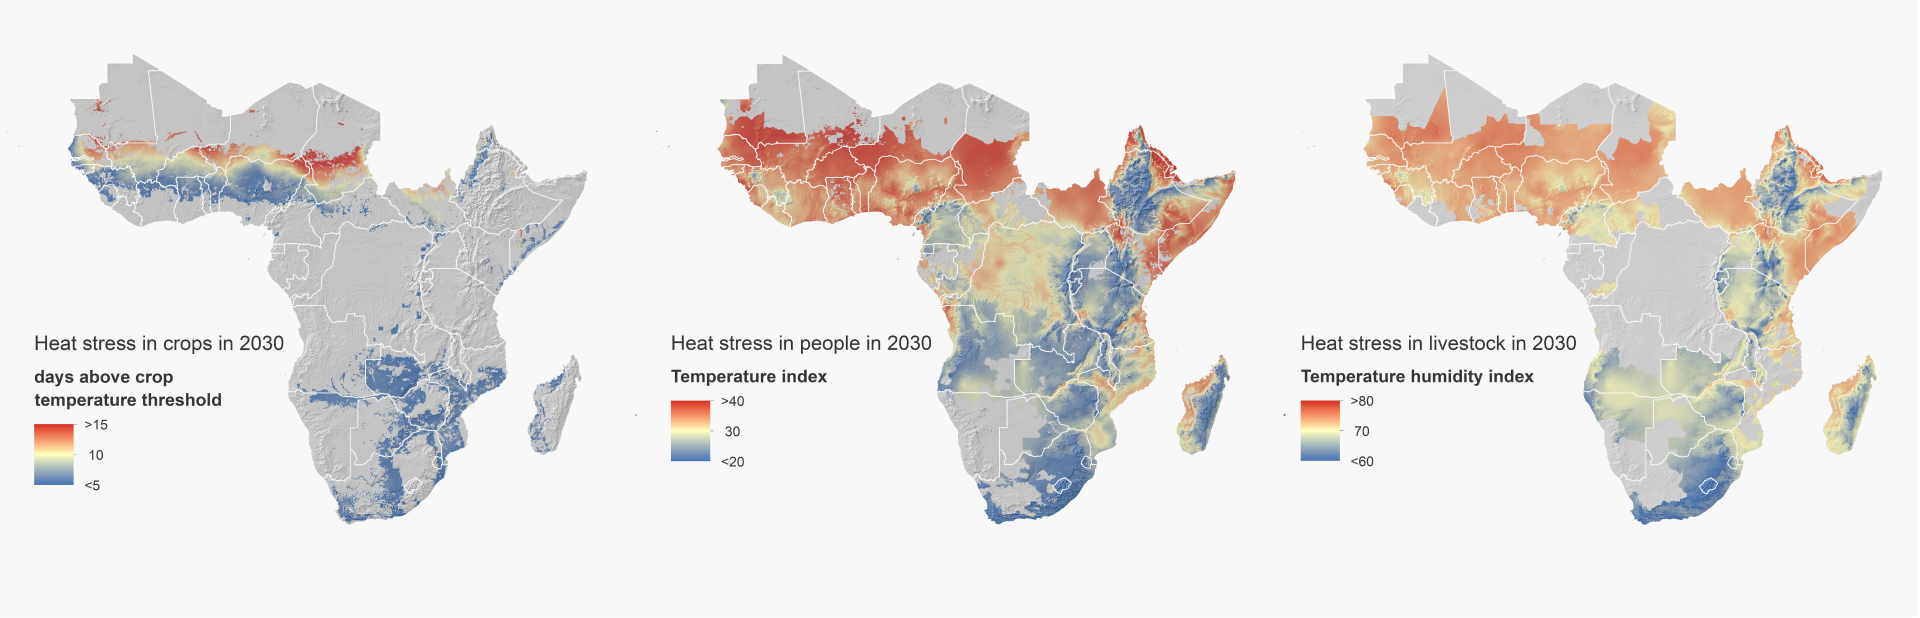 Data Insight 1, Maps 2, 3, 4: Heat stress in crops, people and livestock in 2030 